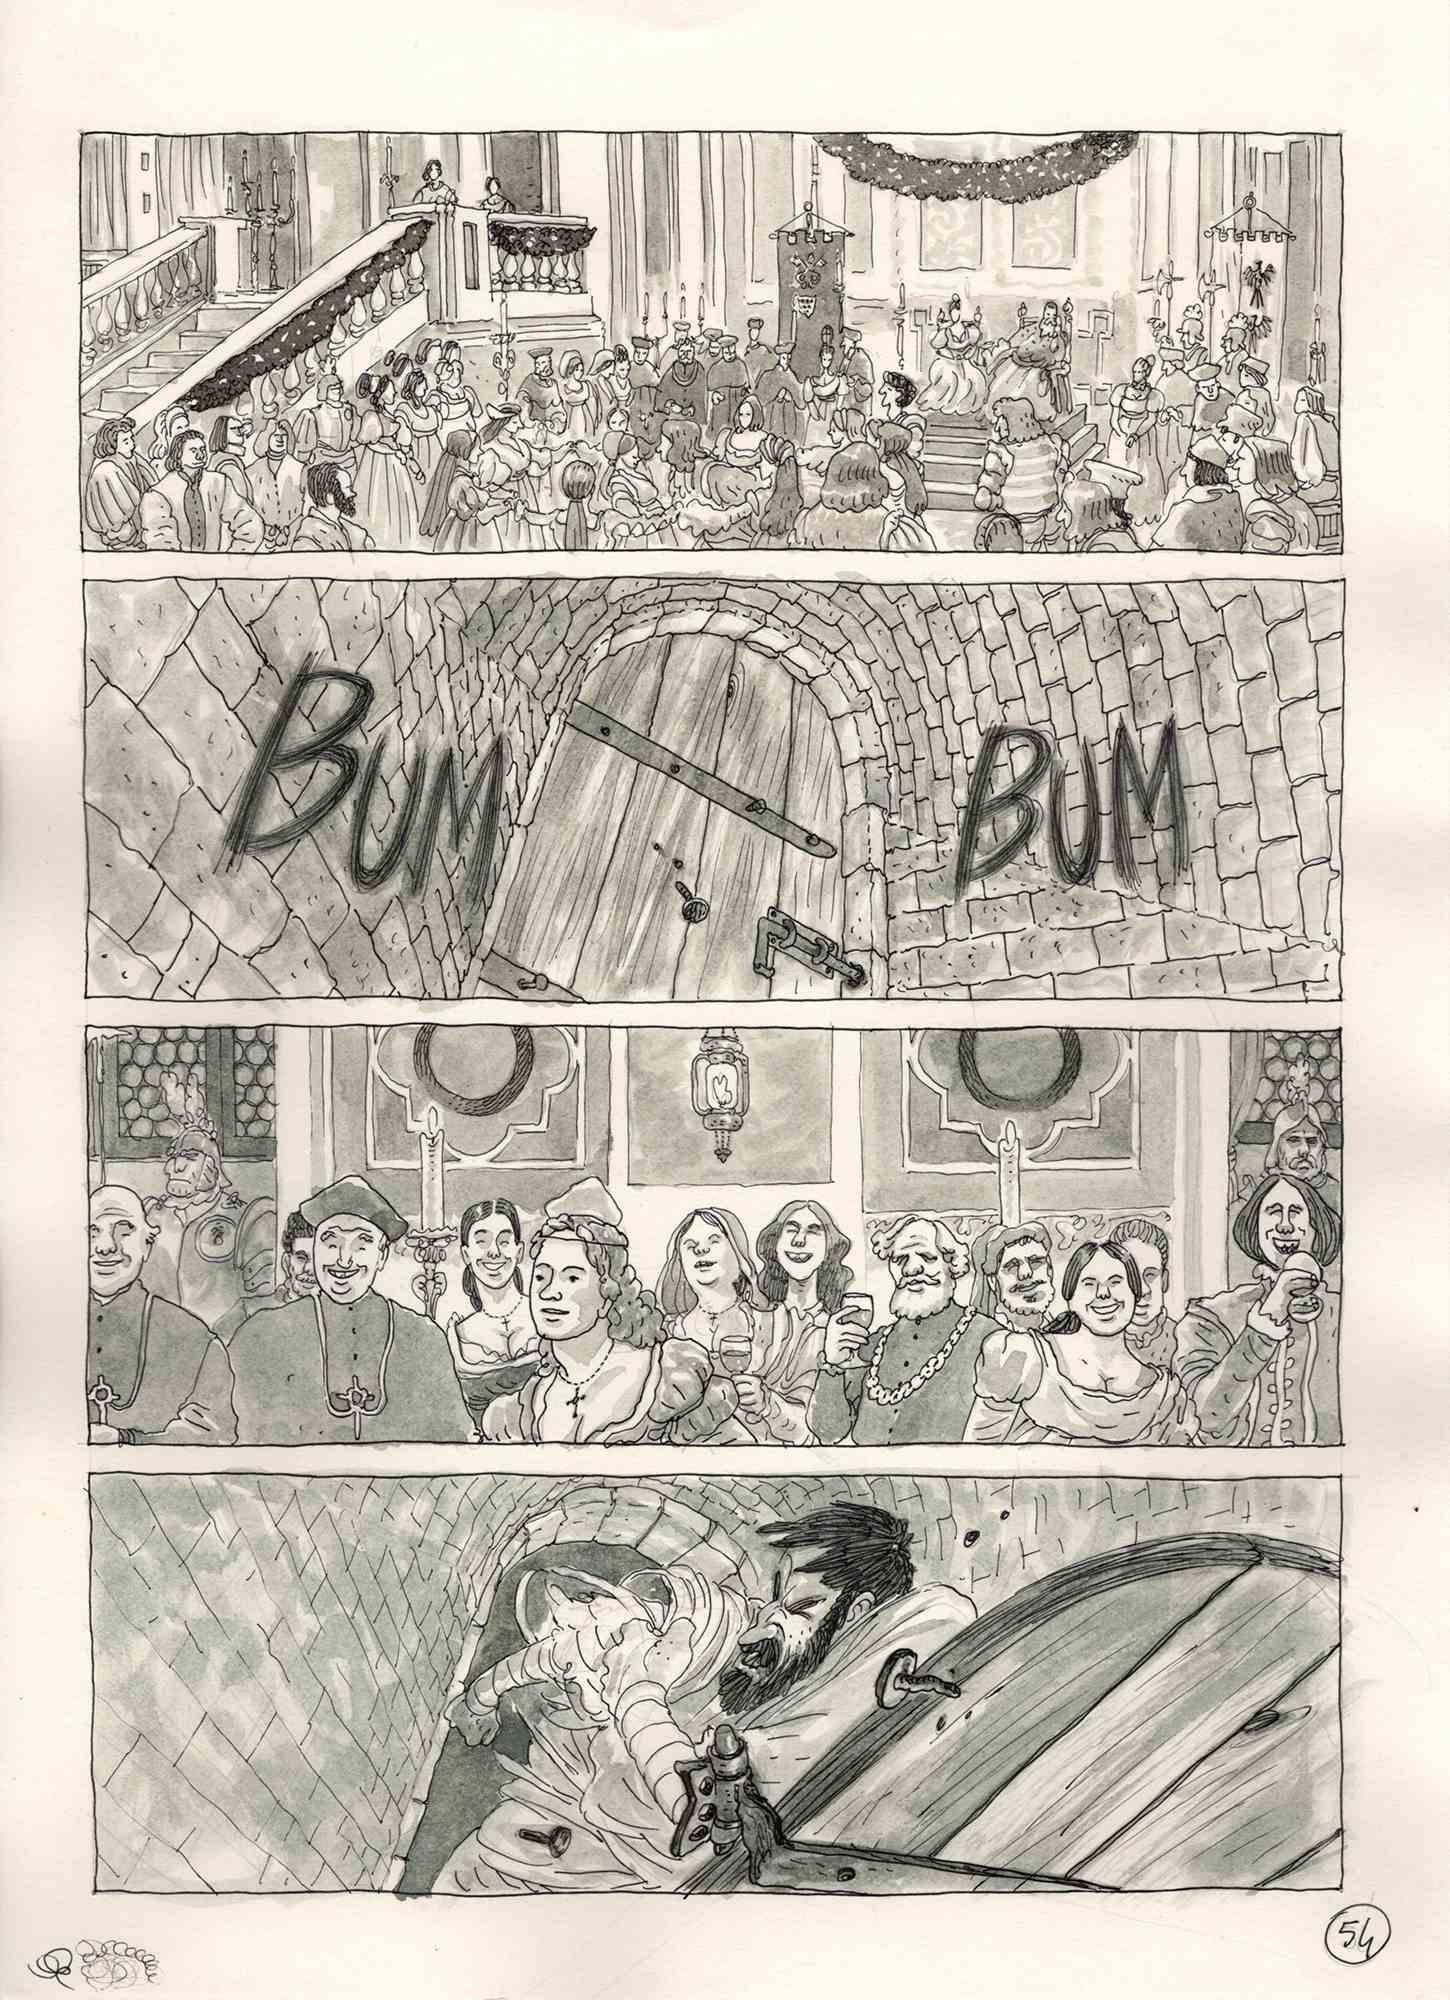 This work entitled "Party at the court of Pope Paul III" is a board of the graphic novel published in 2016 by Kleiner Flug in Italy "Benvenuto Cellini". The work was done by Vincenzo Bizzarri in 2015 with ink and watercolor on 200gr paper (33x24cm).